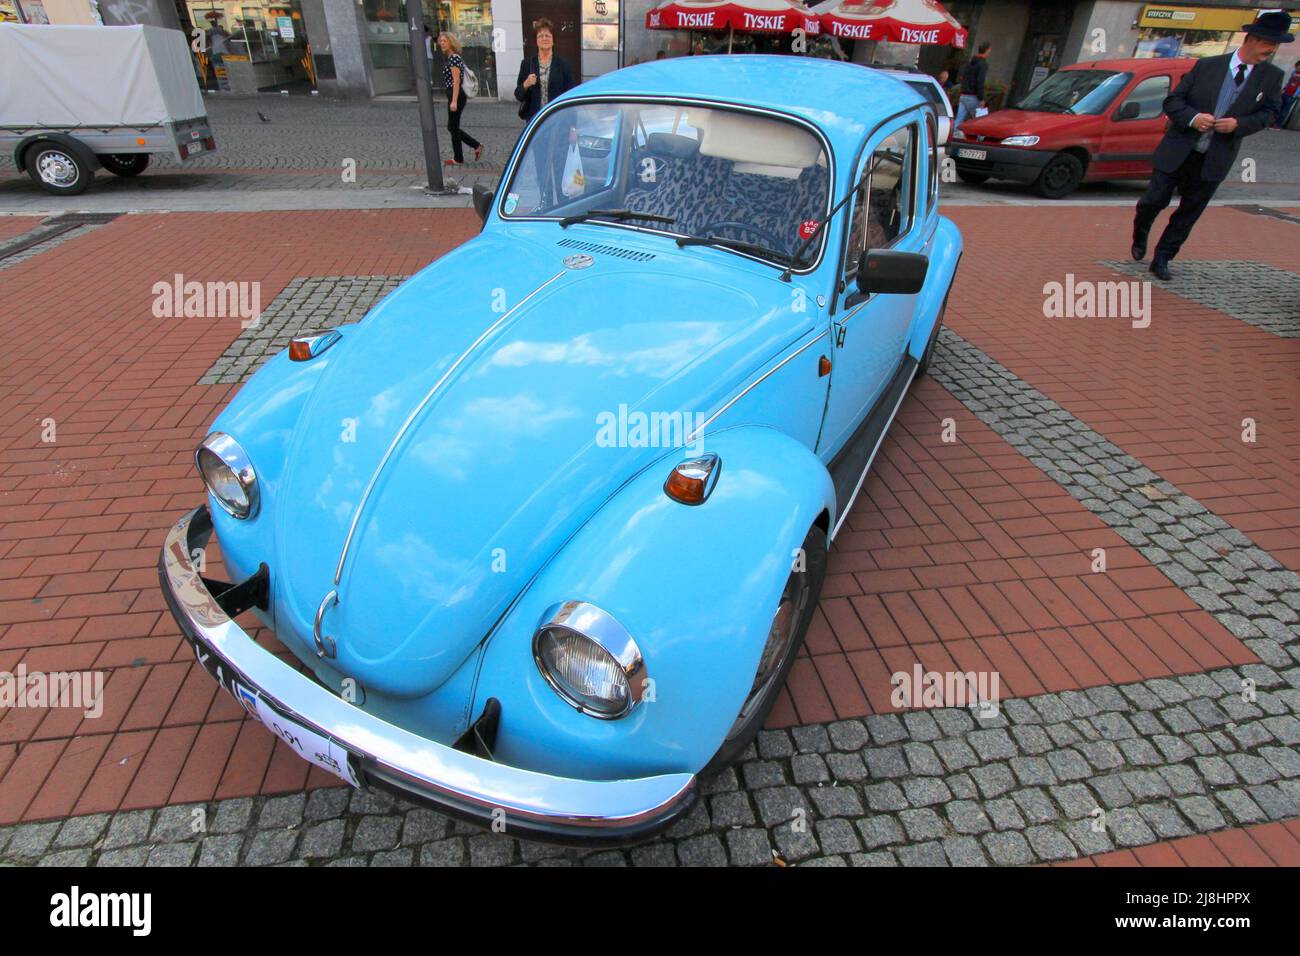 BYTOM, POLAND - SEPTEMBER 12, 2015: Classic Volkswagen Beetle during 12th Historic Vehicle Rally in Bytom. The annual vehicle parade is one of main ev Stock Photo